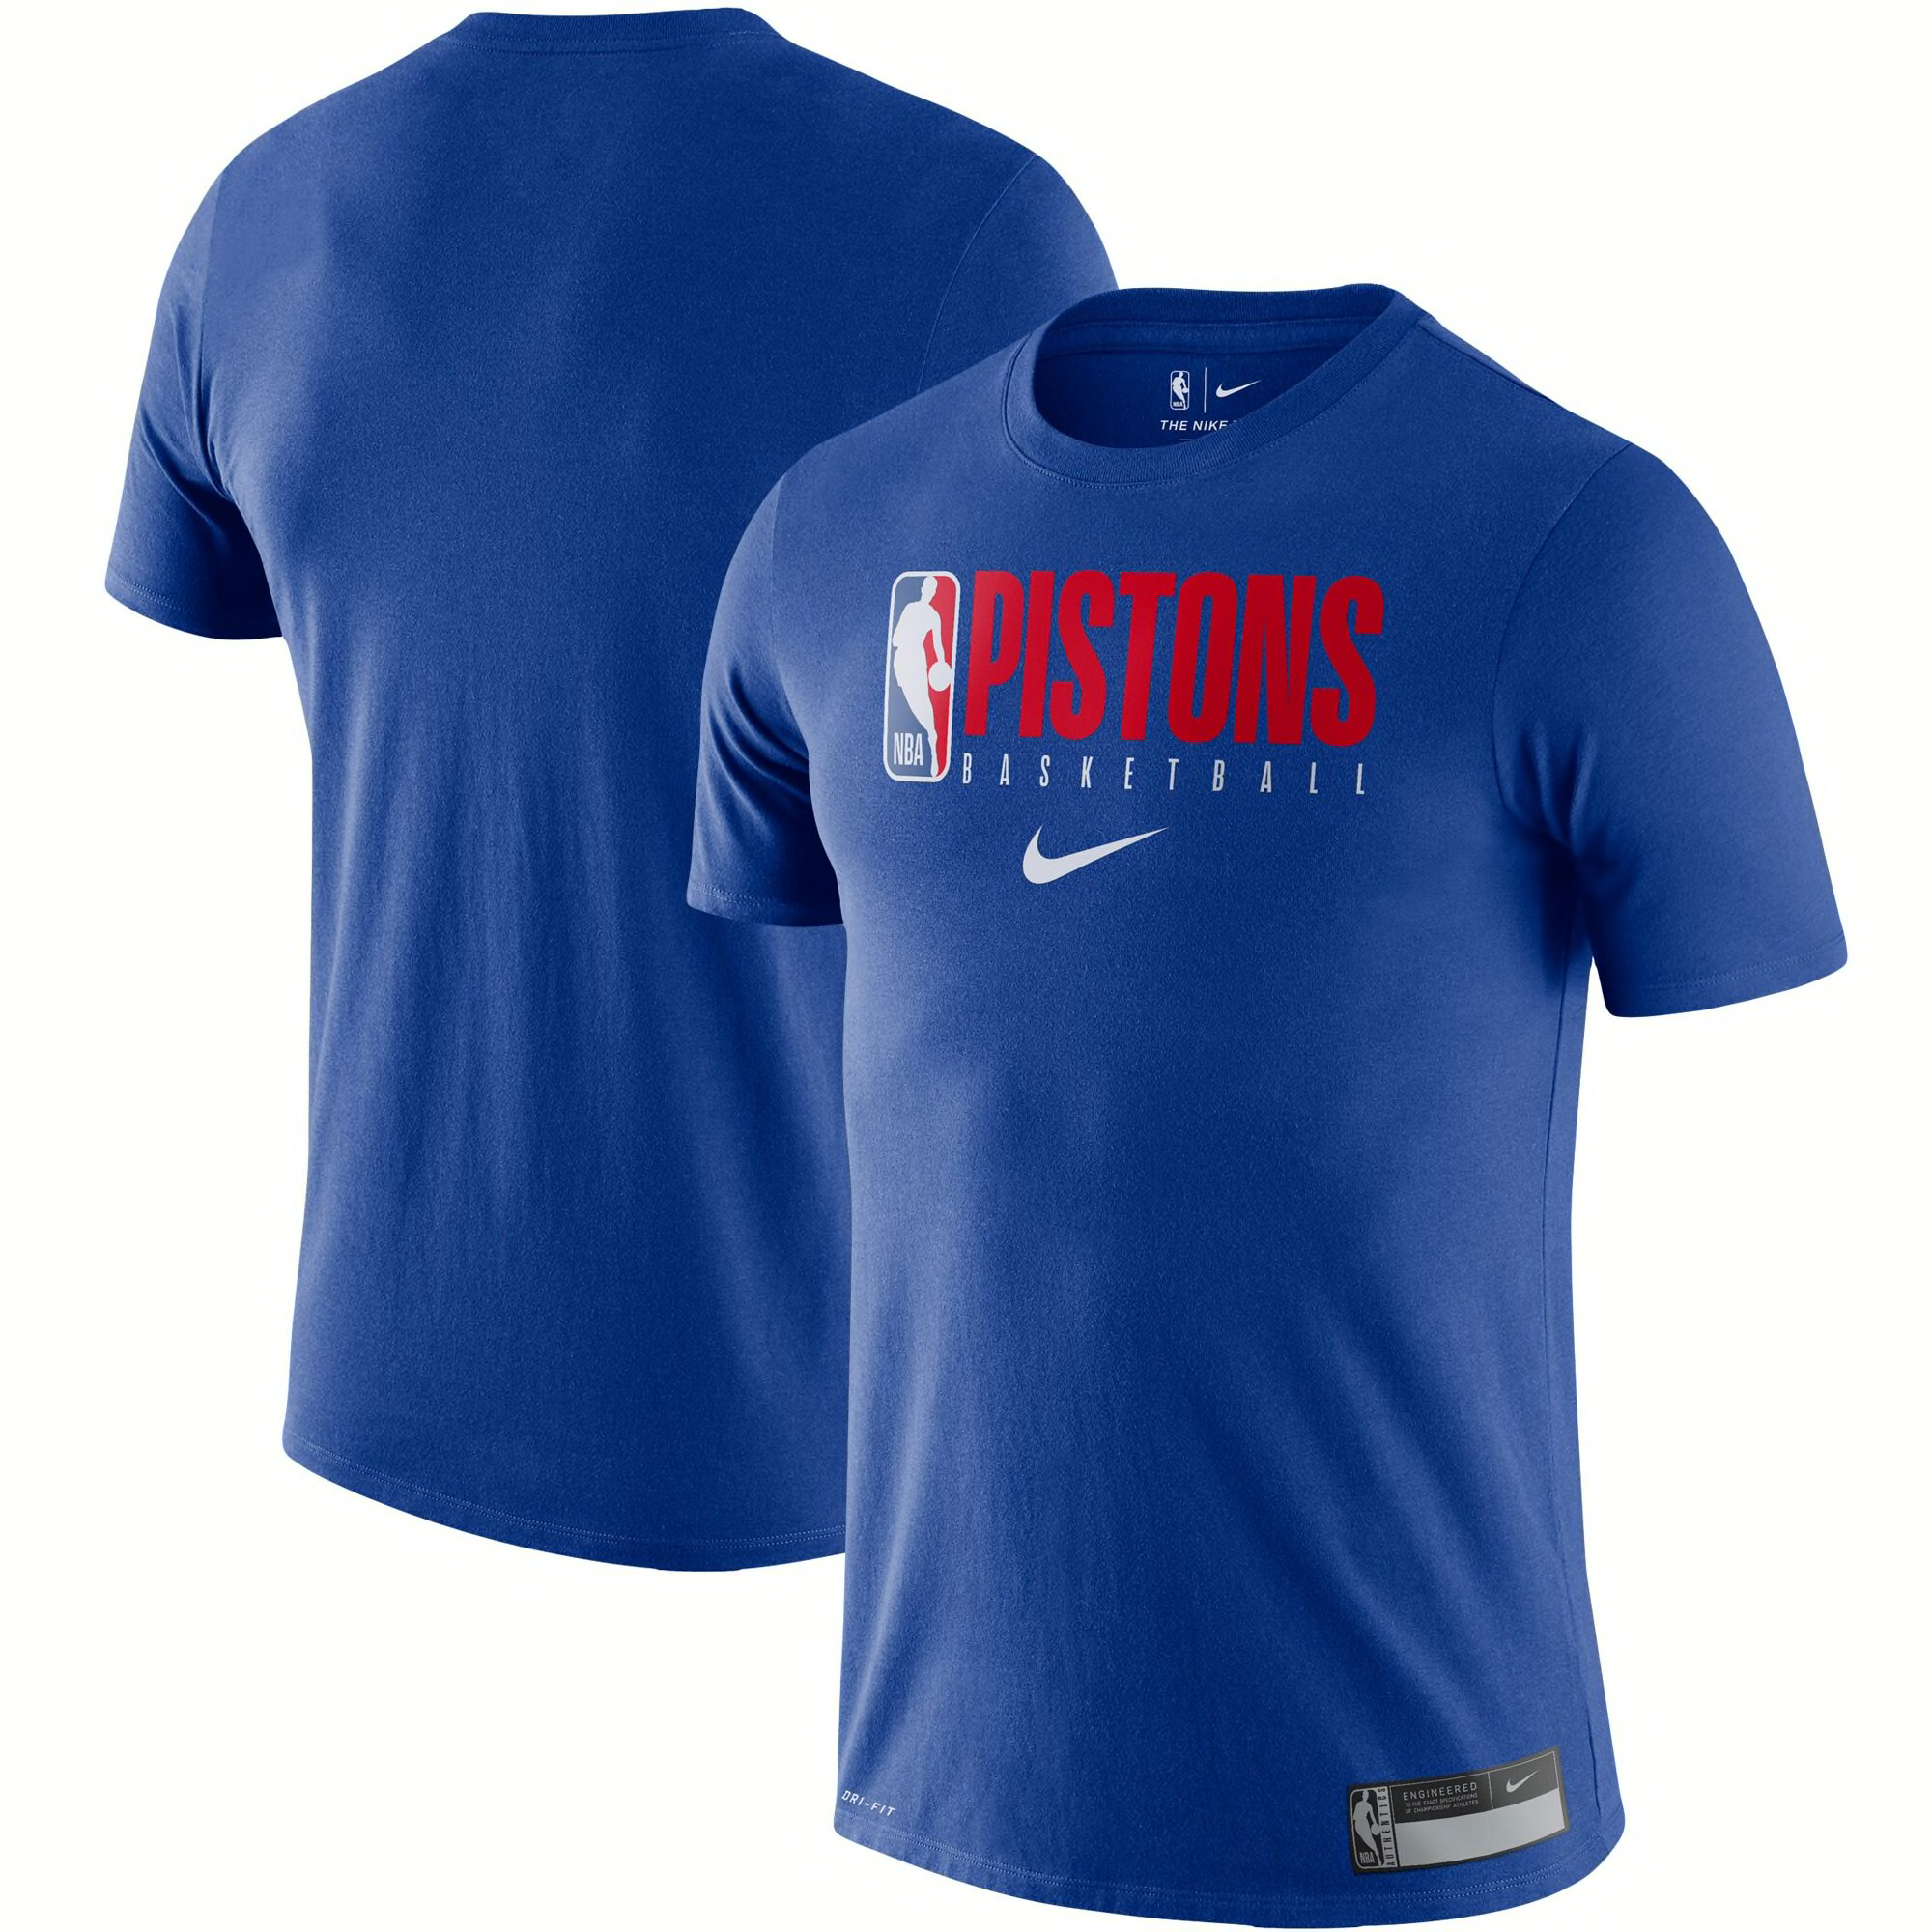 Father’s Day gifts for the Detroit Pistons fan